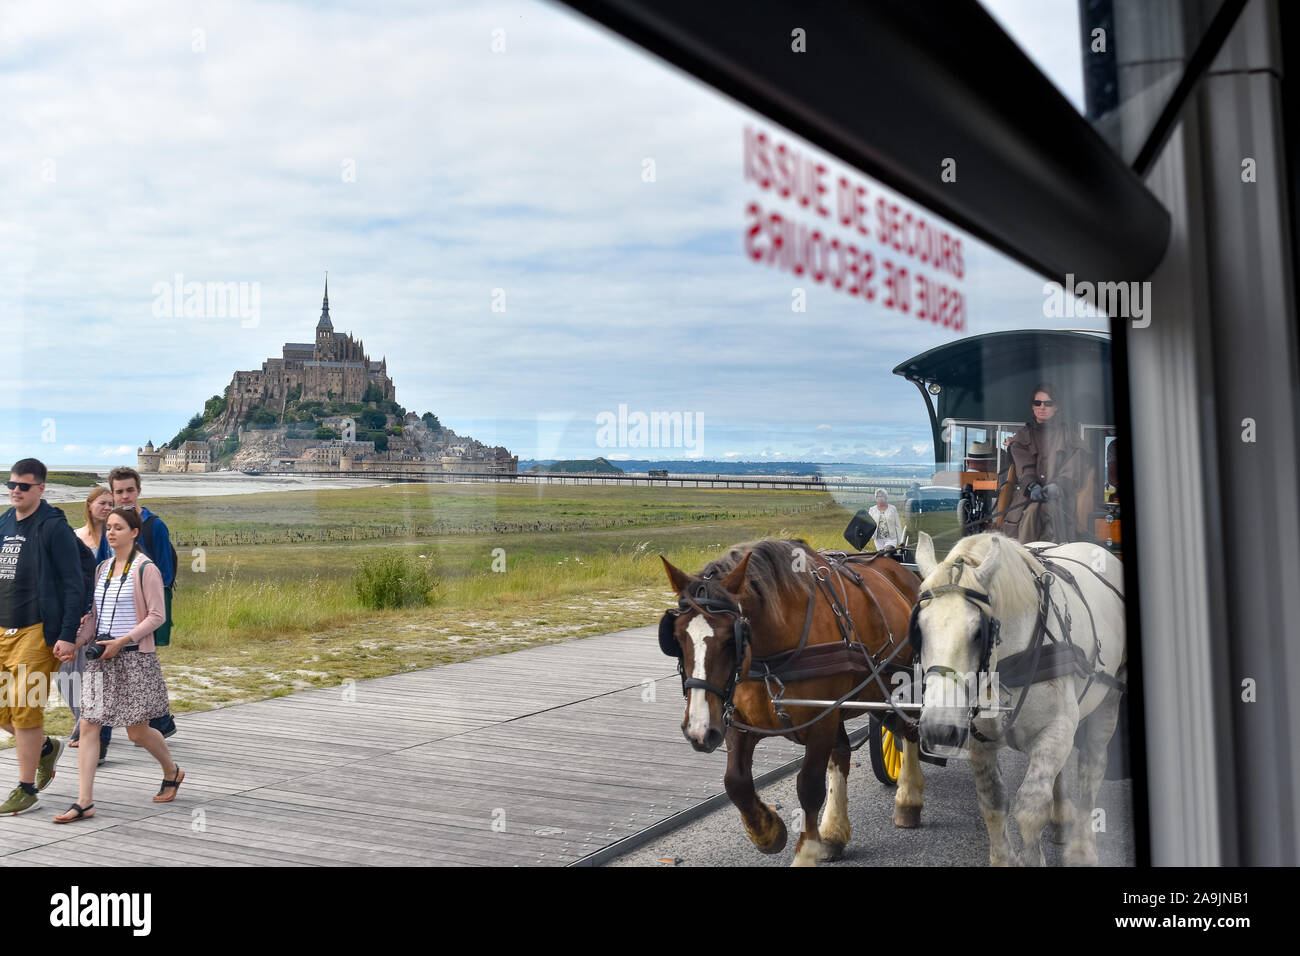 MONT SAINT-MICHEL, FRANCE - JULY 3, 2017: Tourists can choose different means of transportation, walking, bus or horse-drawn carriage. It is not possi Stock Photo